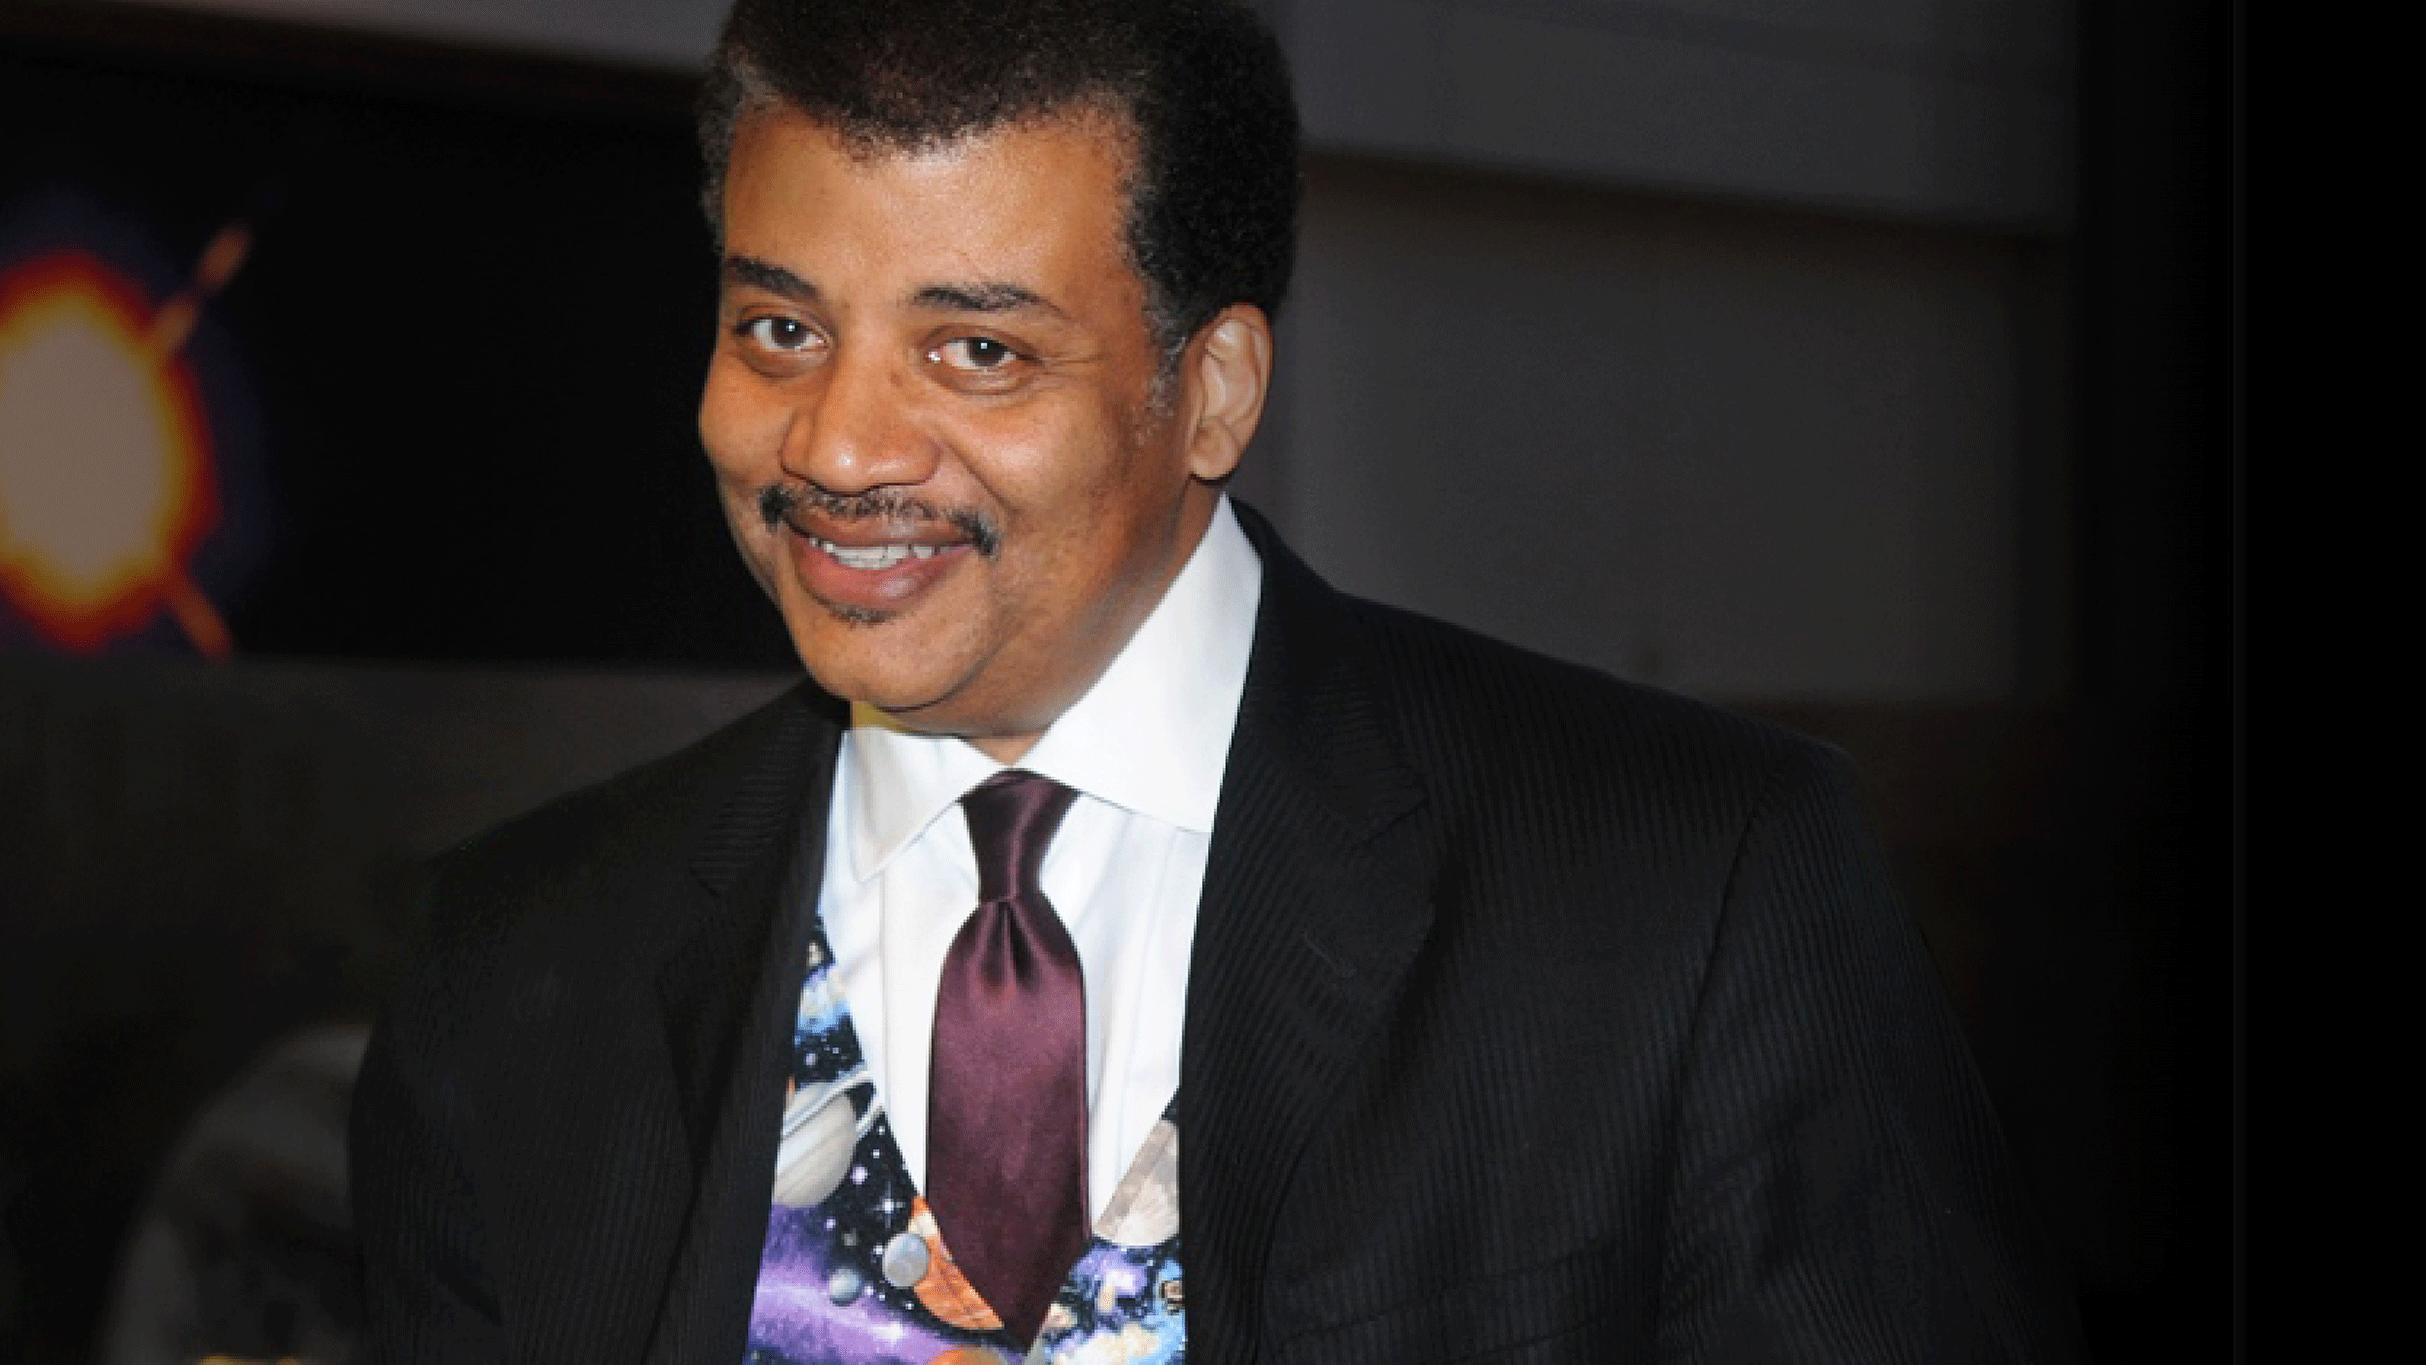 Neil deGrasse Tyson: This Just In: Latest Discoveries in the Universe